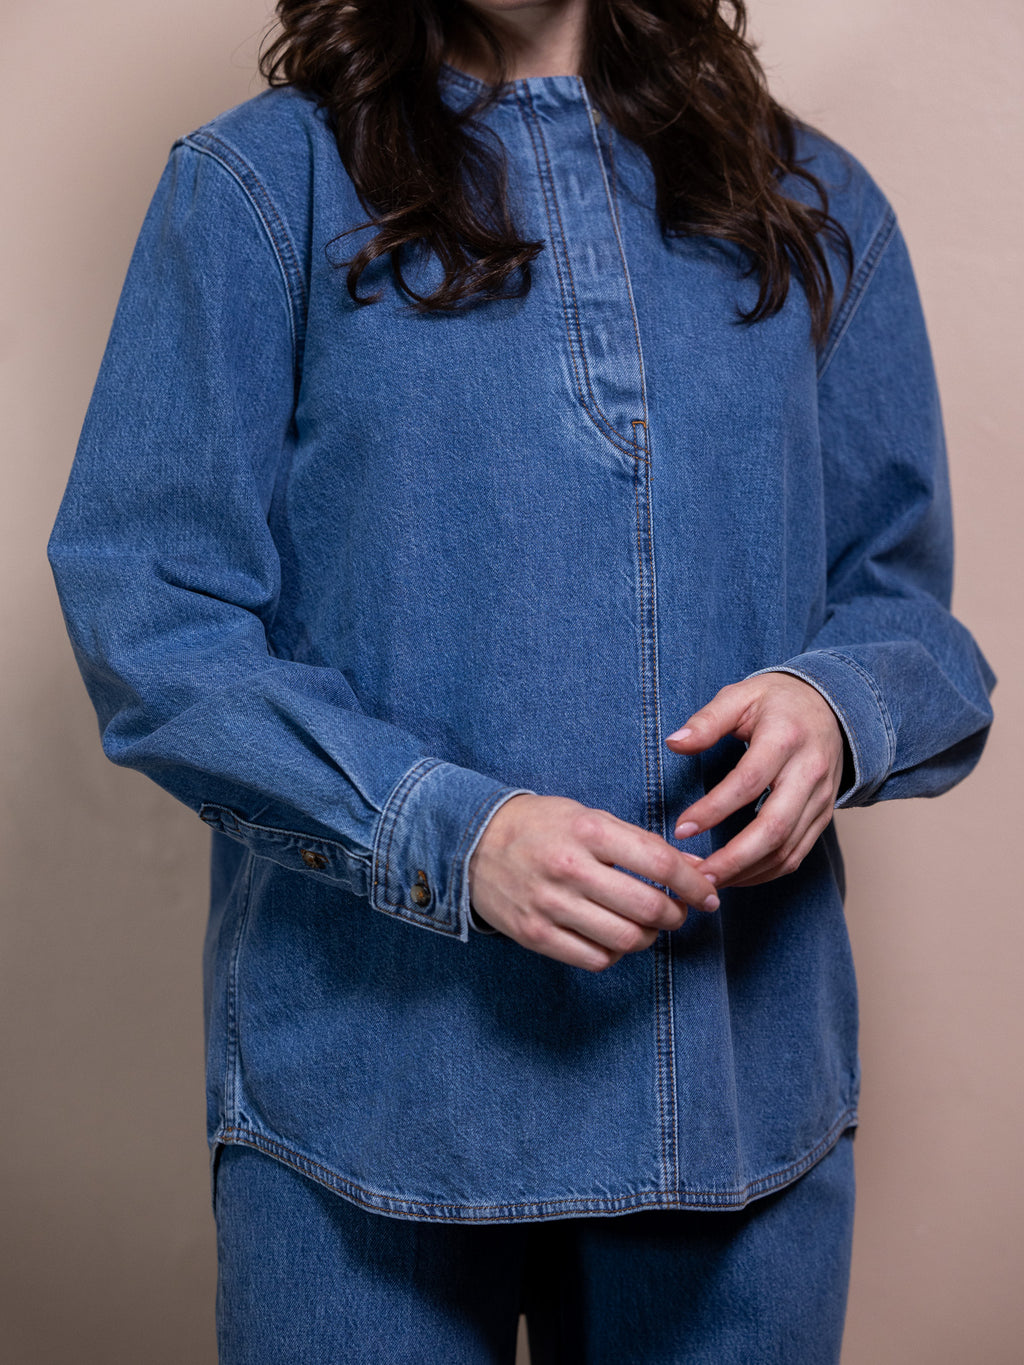 Woman in blue denim shirt and blue jeans against pink background